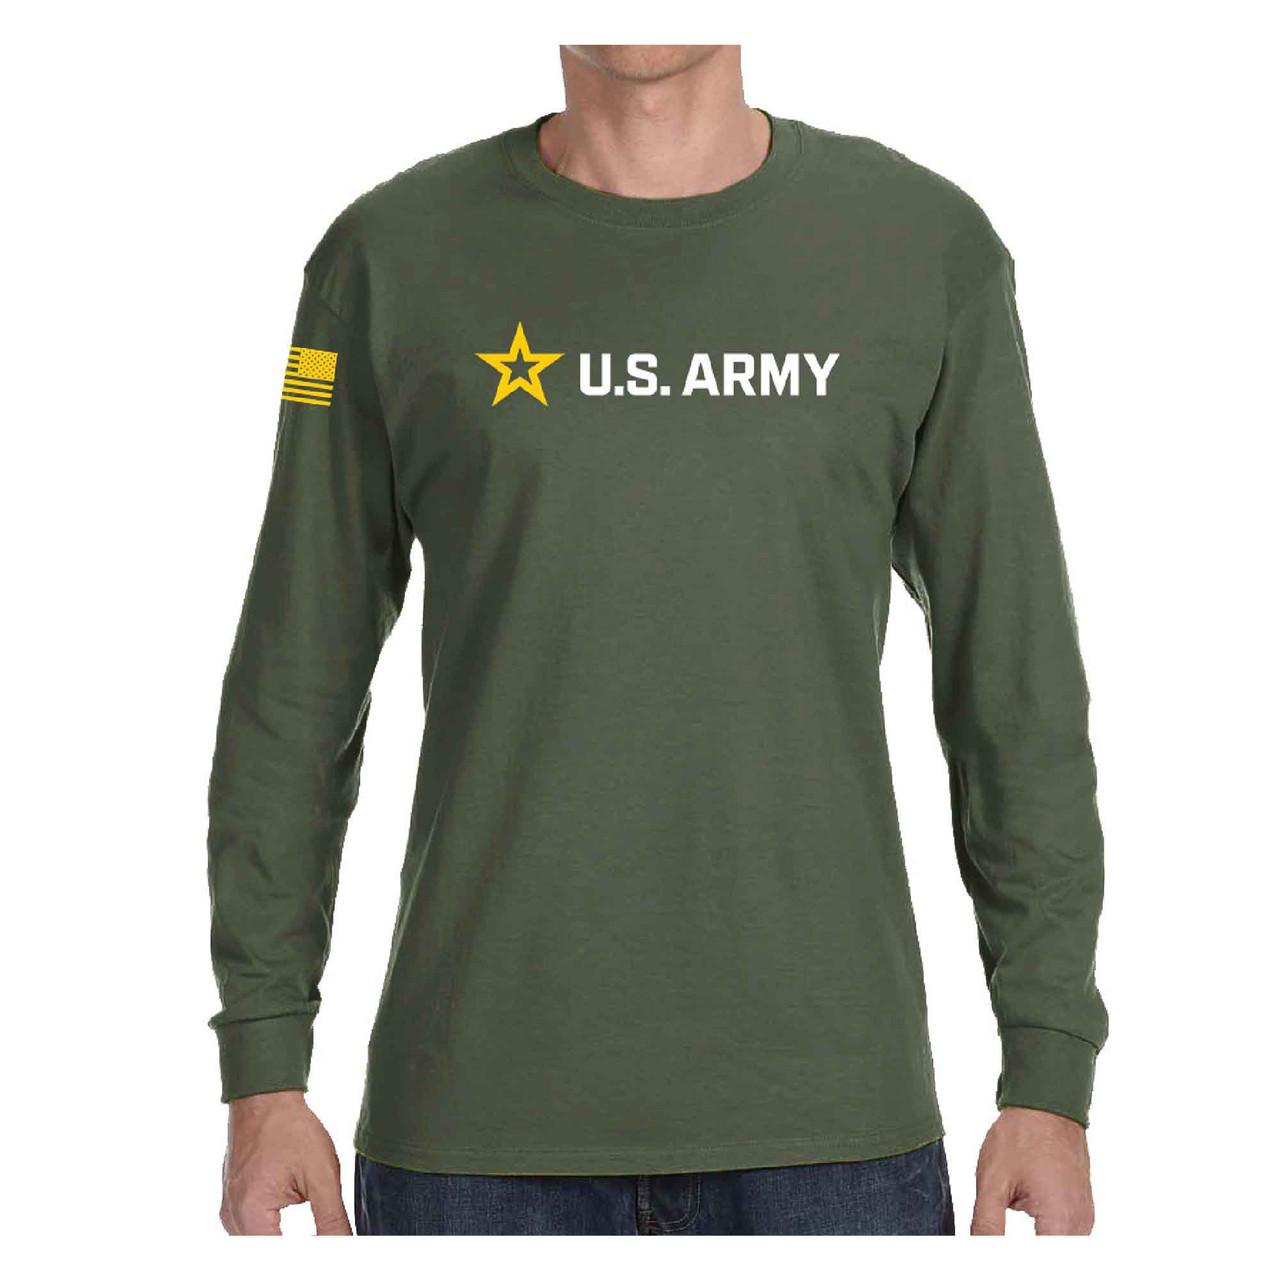 NEW Officially Licensed United States Army Logo and New Slogan on Graphic Olive Drab Long Sleeve Shirt front view